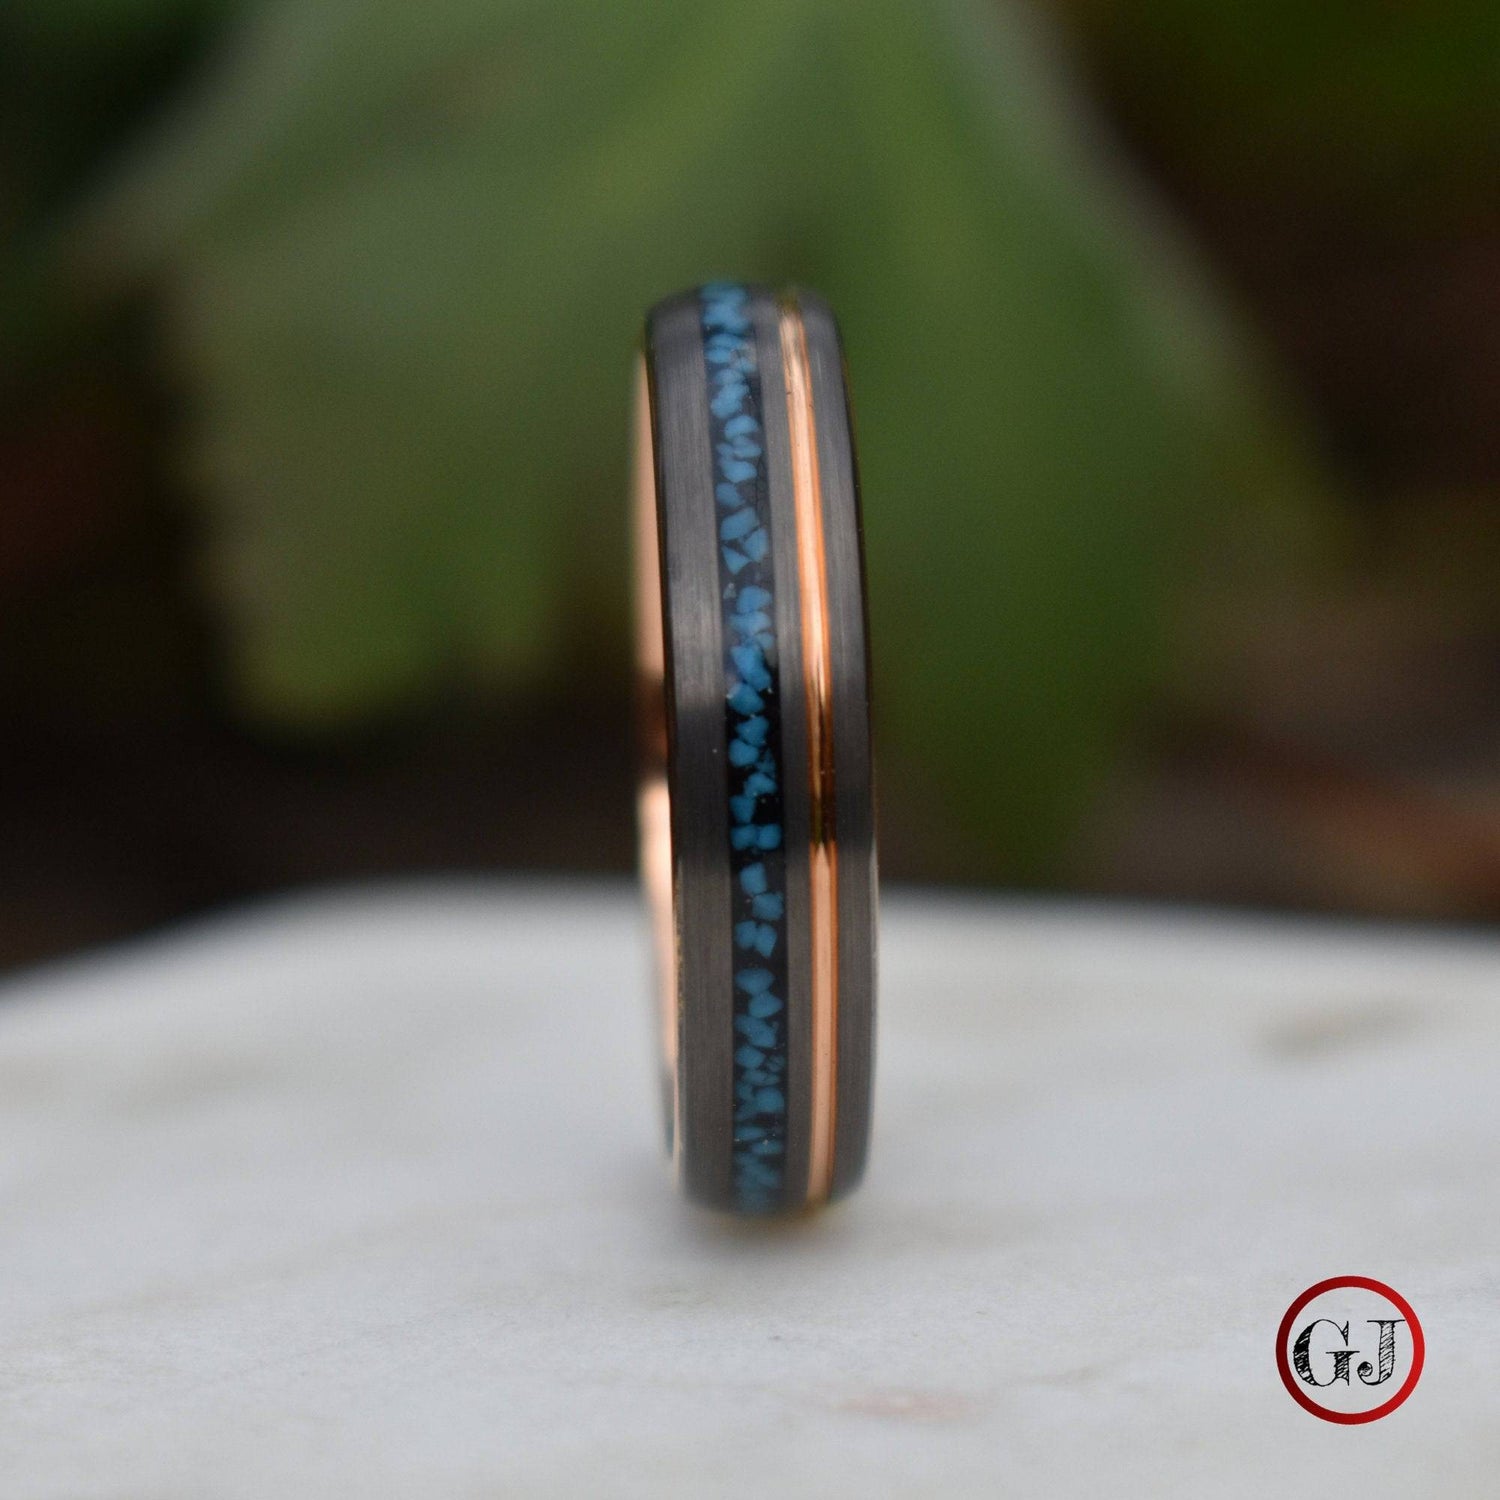 Tungsten 6mm Ring Grey with Rose Gold Accent and Crushed Turquoise - Tungsten Titans